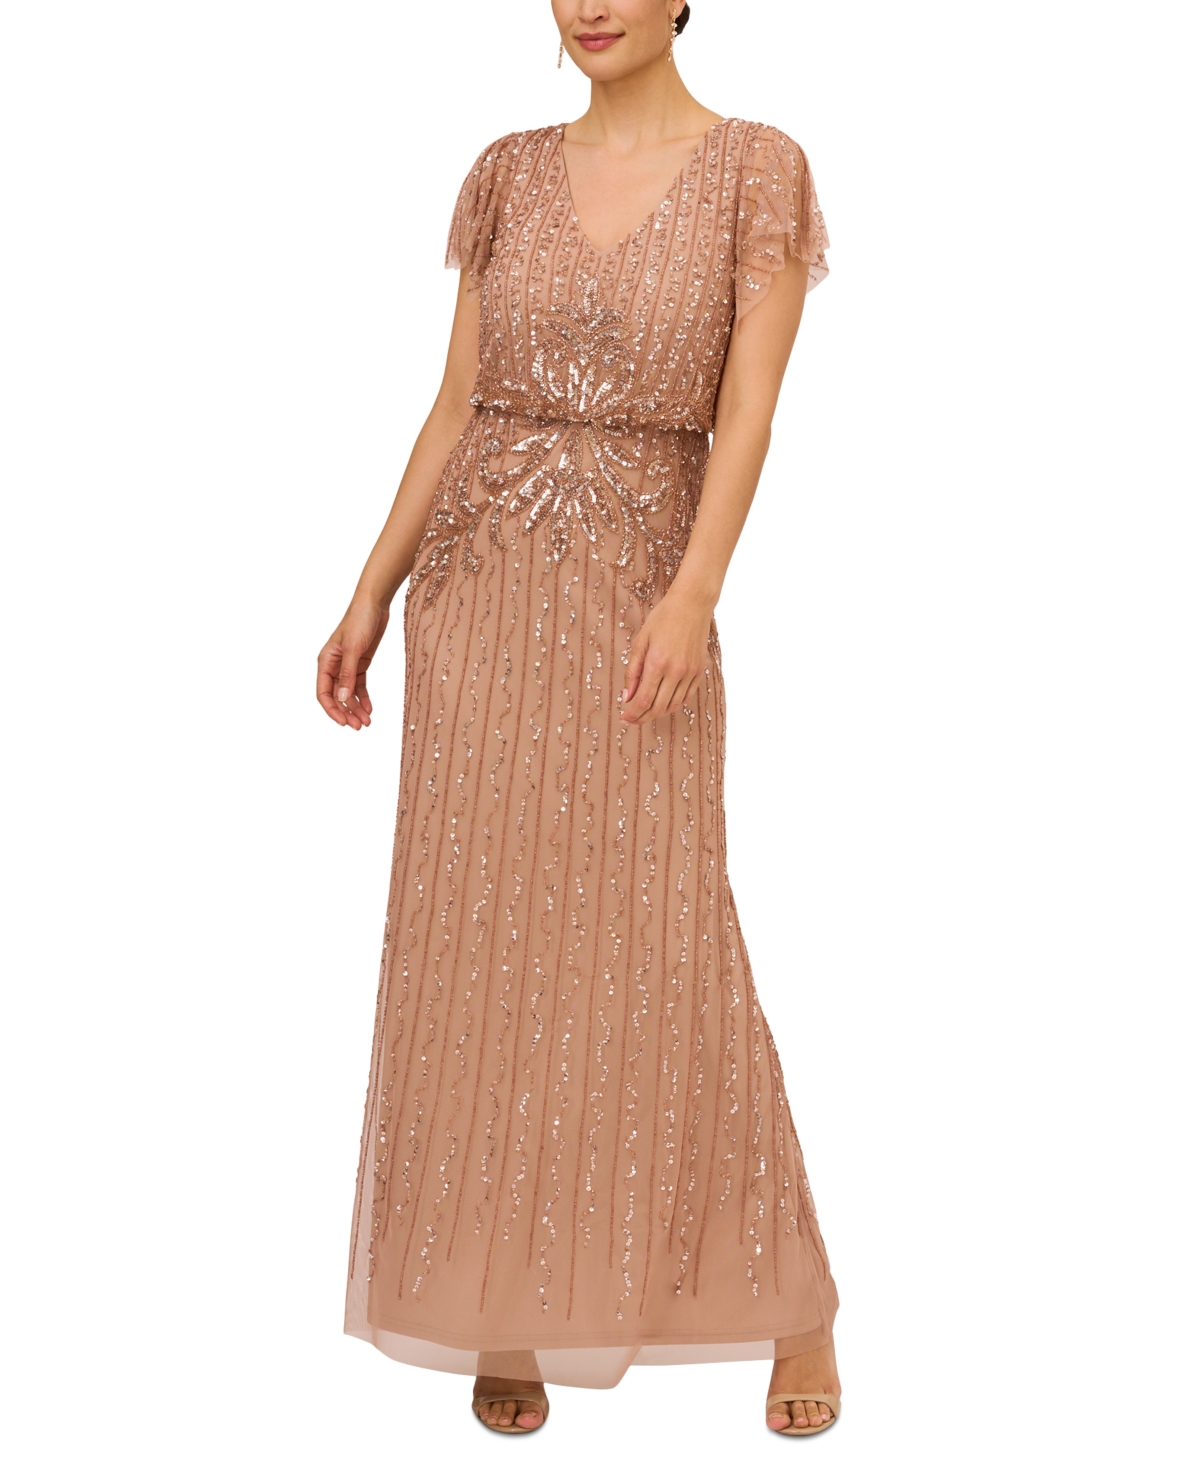 1920s Evening Dresses & Formal Gowns Adrianna Papell Womens Beaded Flutter-Sleeve Gown - Rose Gold $249.00 AT vintagedancer.com